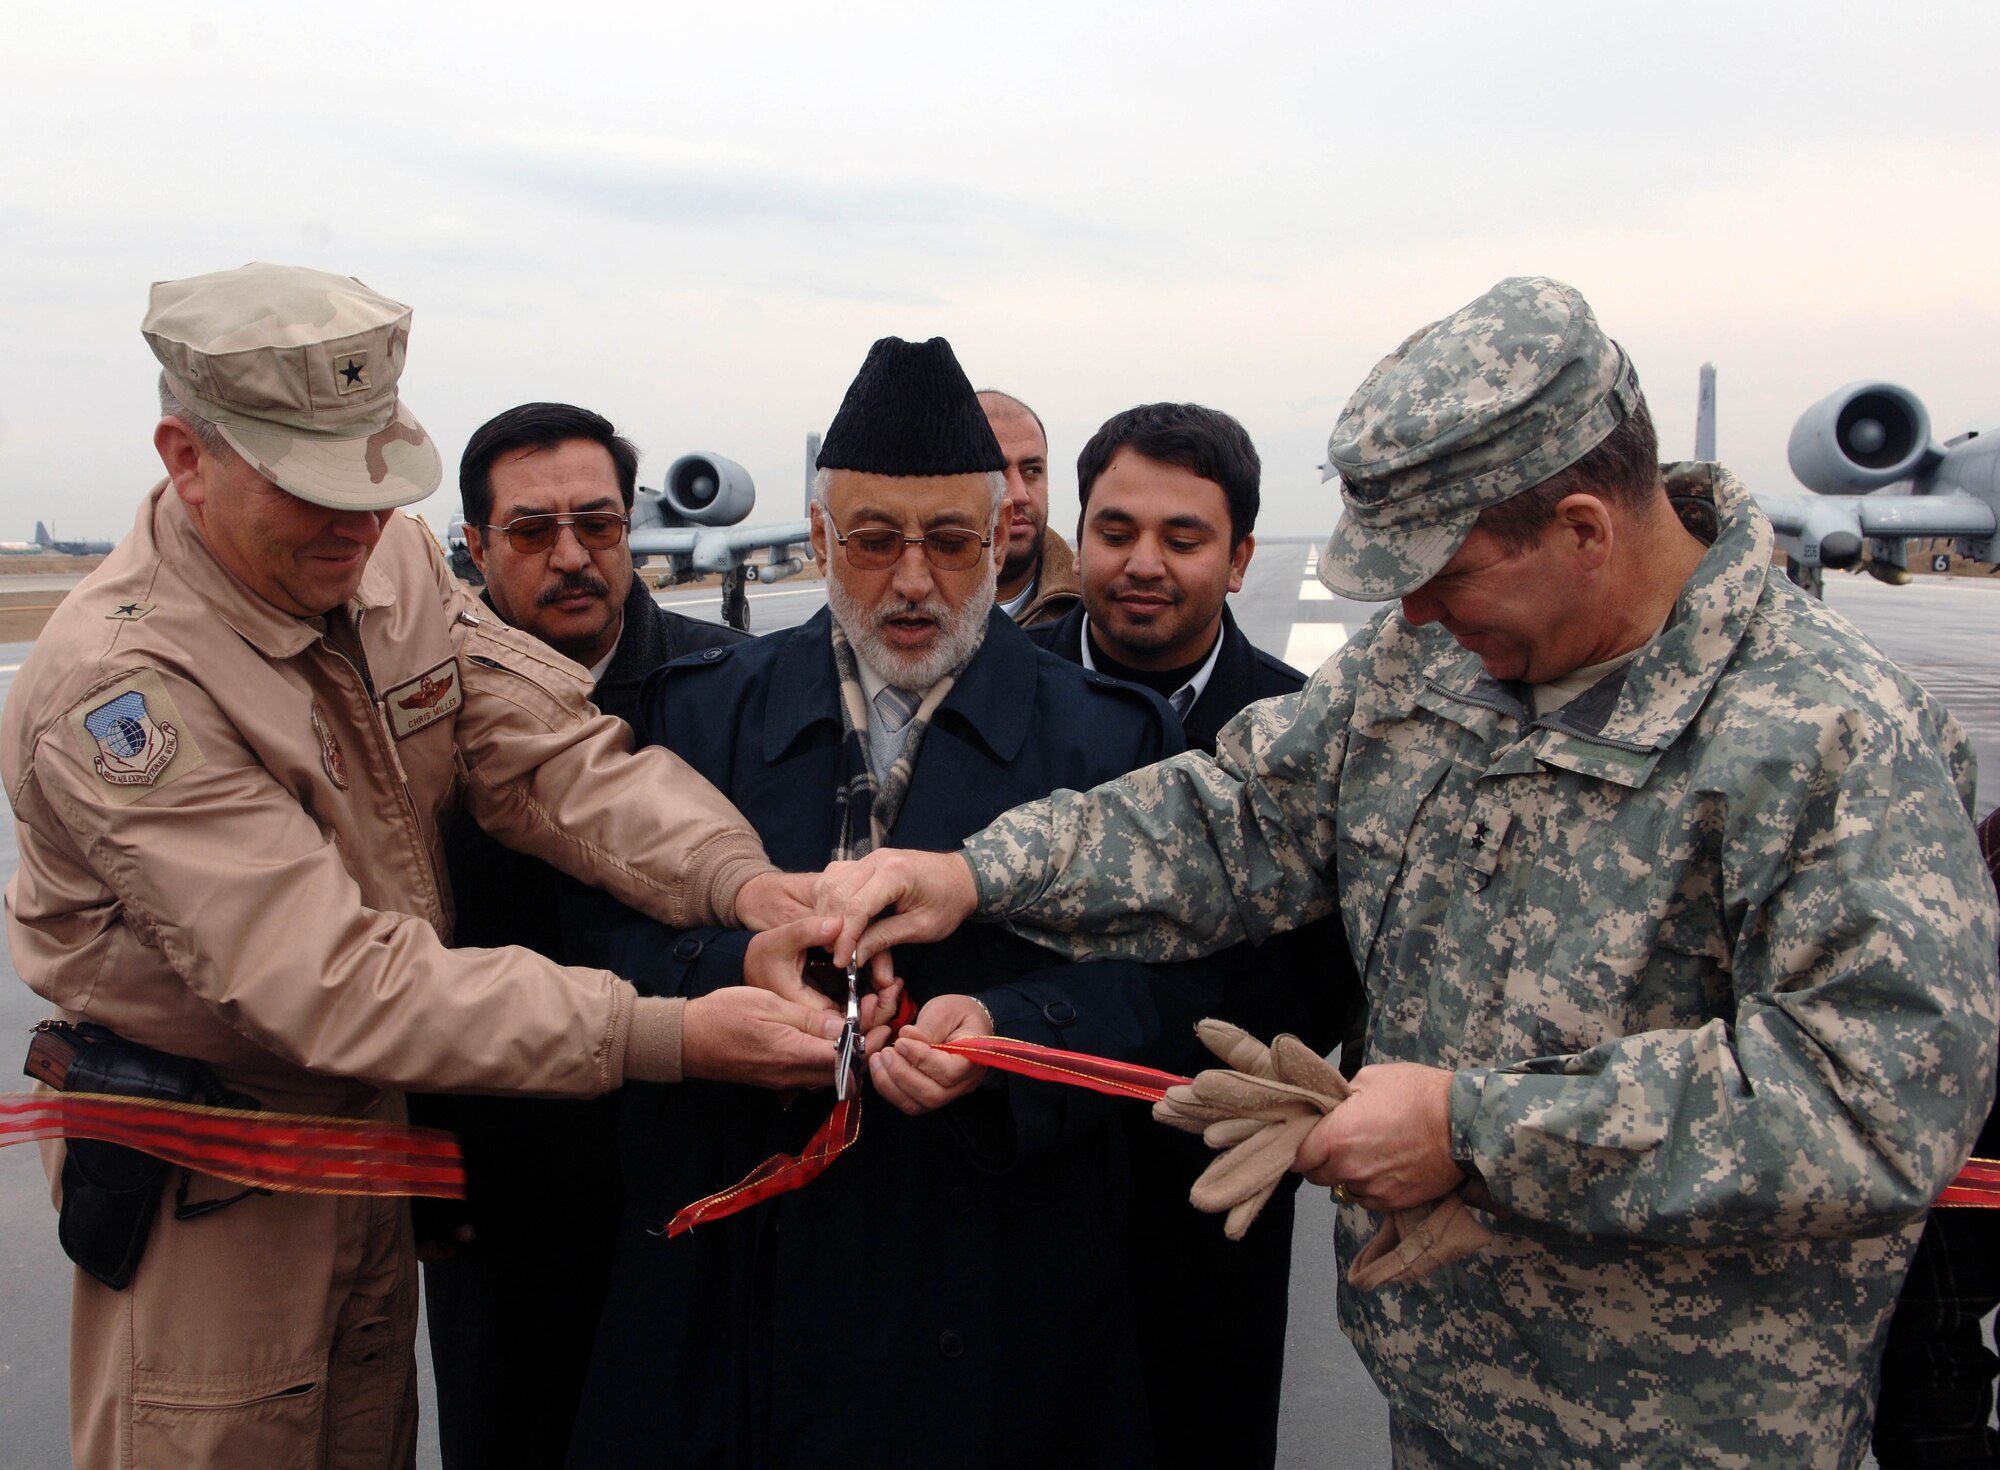 Brig. Gen. Christopher Miller, 455th Air Expeditionary Wing commander (L) along with Abdul Taqwa, governor of Parwan Province and Maj. Gen. Benjamin Freakley cut the ribbon officially opening the new runway at Bagram Airfield Dec. 20.  The new runway is 2000 feet longer than the previous runway and was designed to accept the majority of aircraft in the military inventory, although it can accept larger aircraft such as the C-5 Galaxy and Boeing 747 if necessary. (U.S. Air Force photo/Tech. Sgt. Joseph Kapinos)